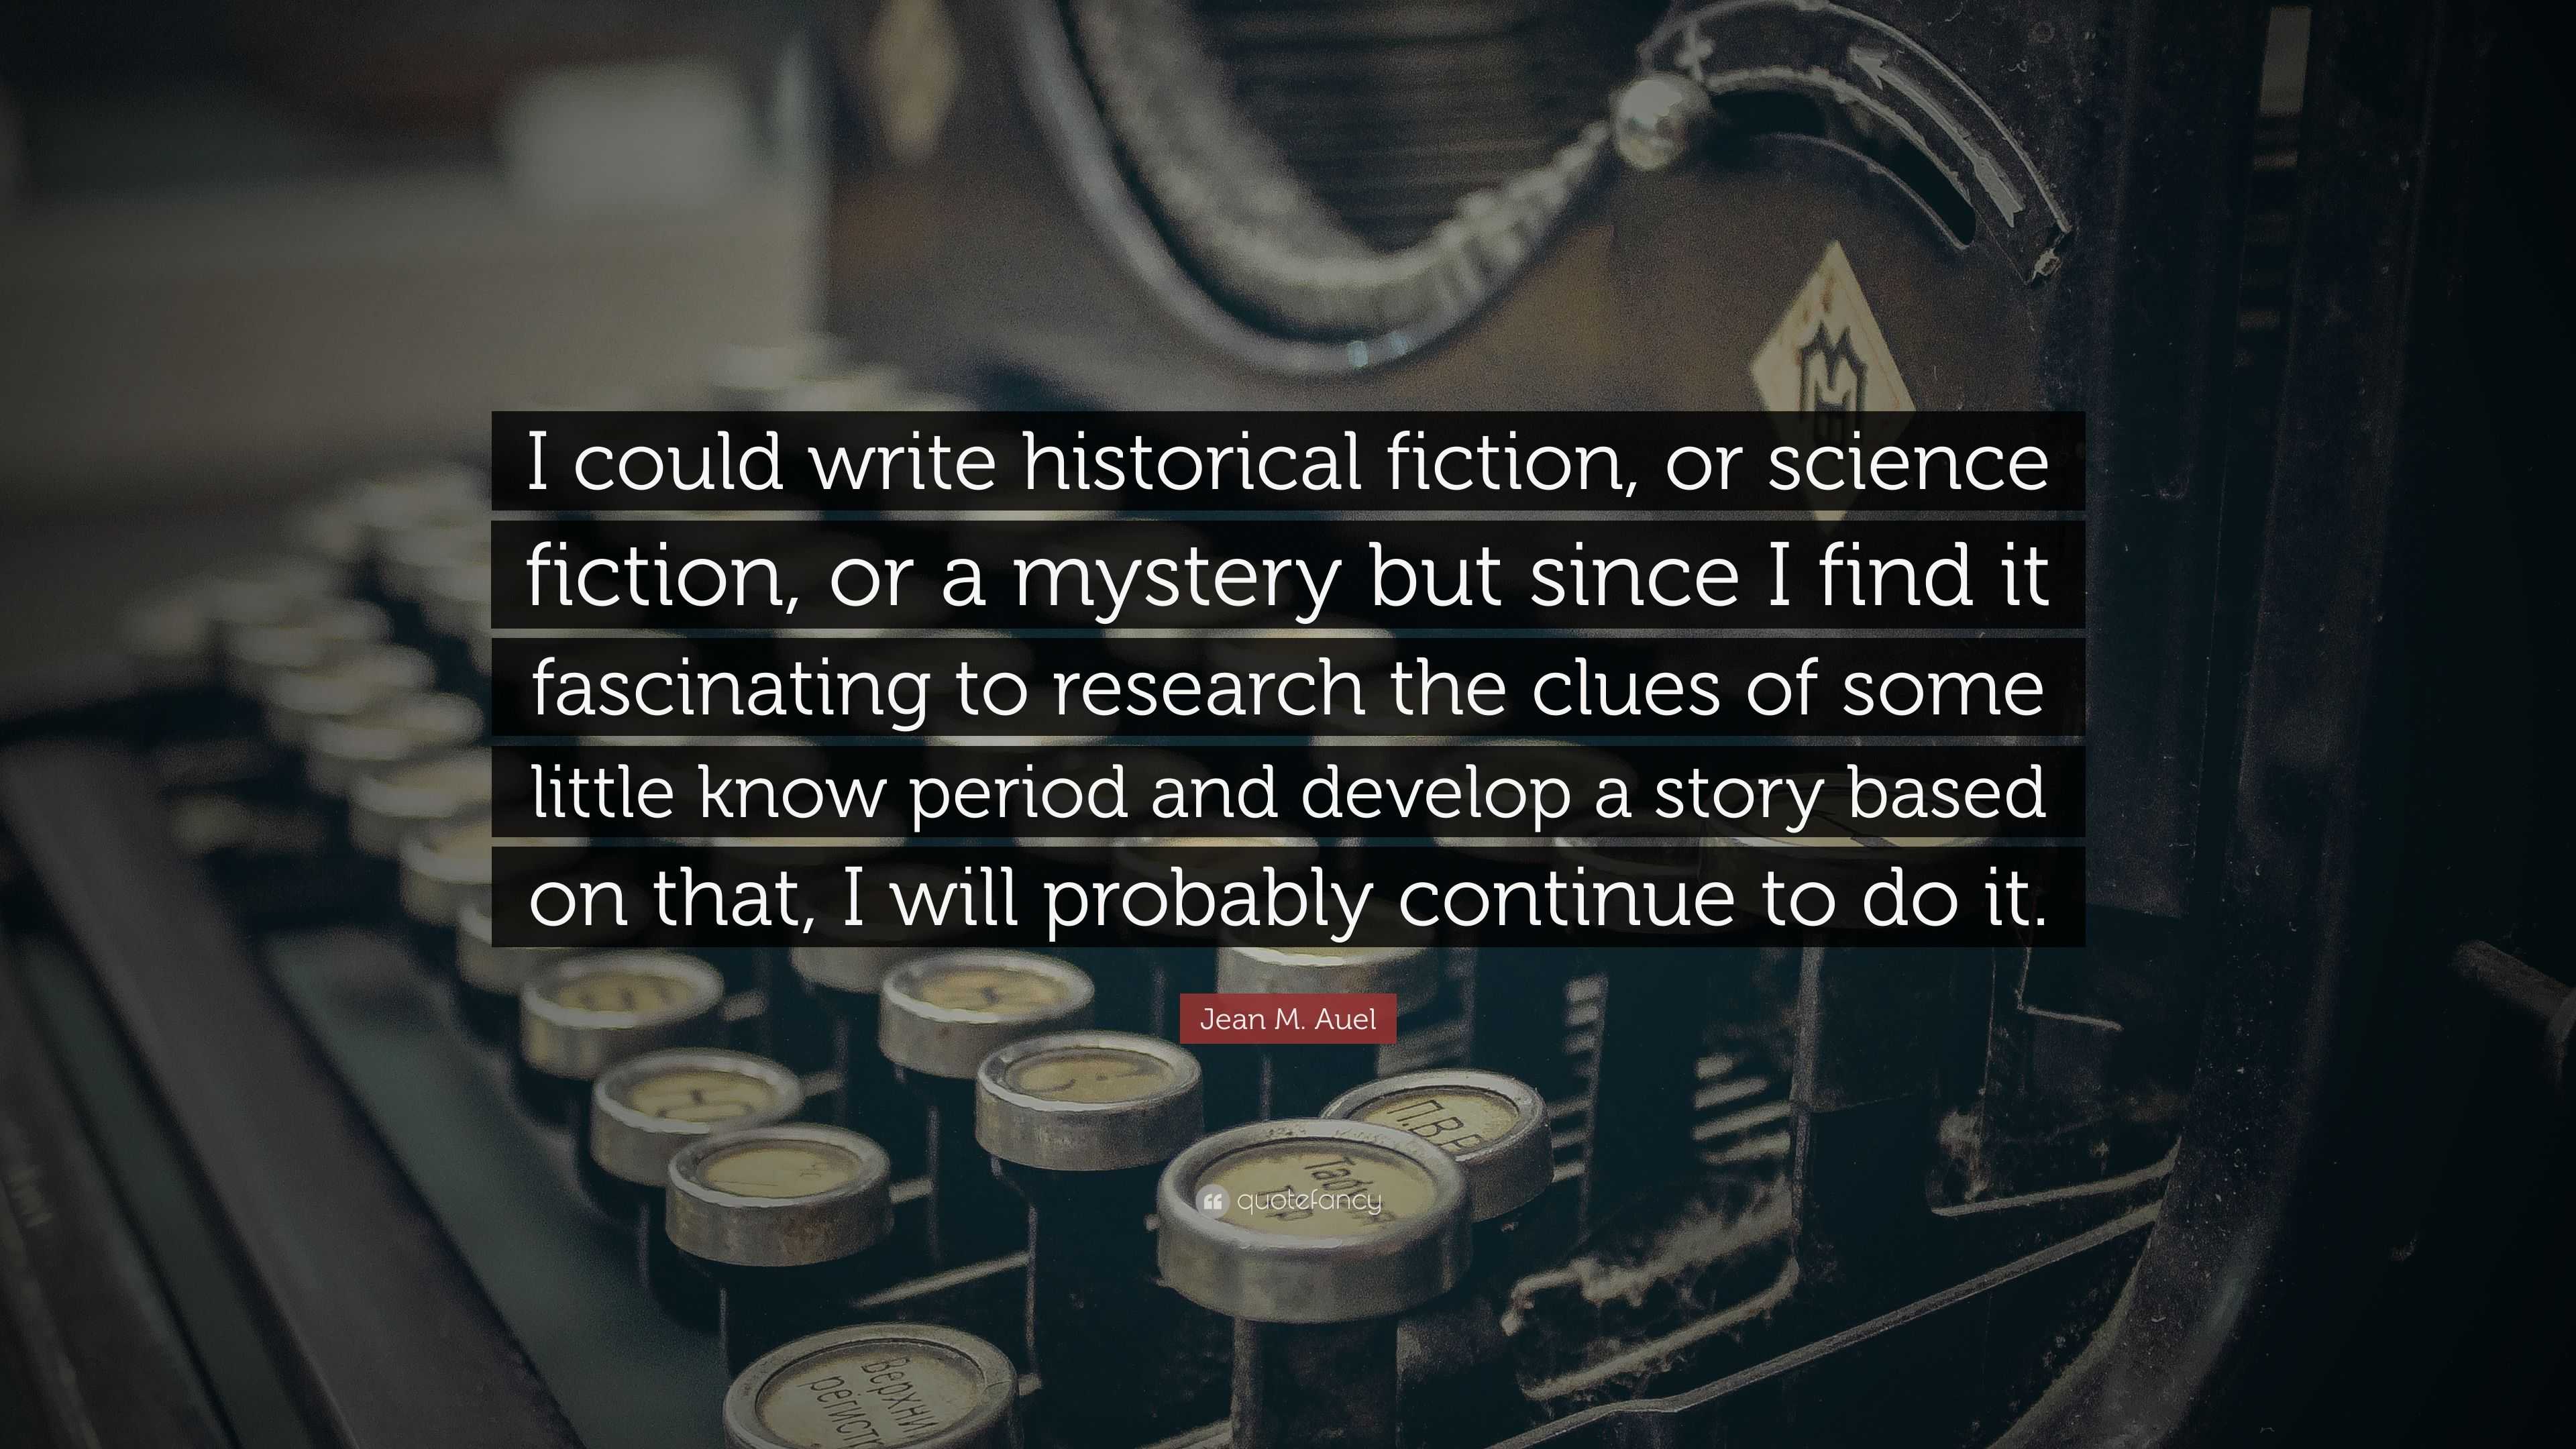 Jean M. Auel Quote: “I could write historical fiction, or science